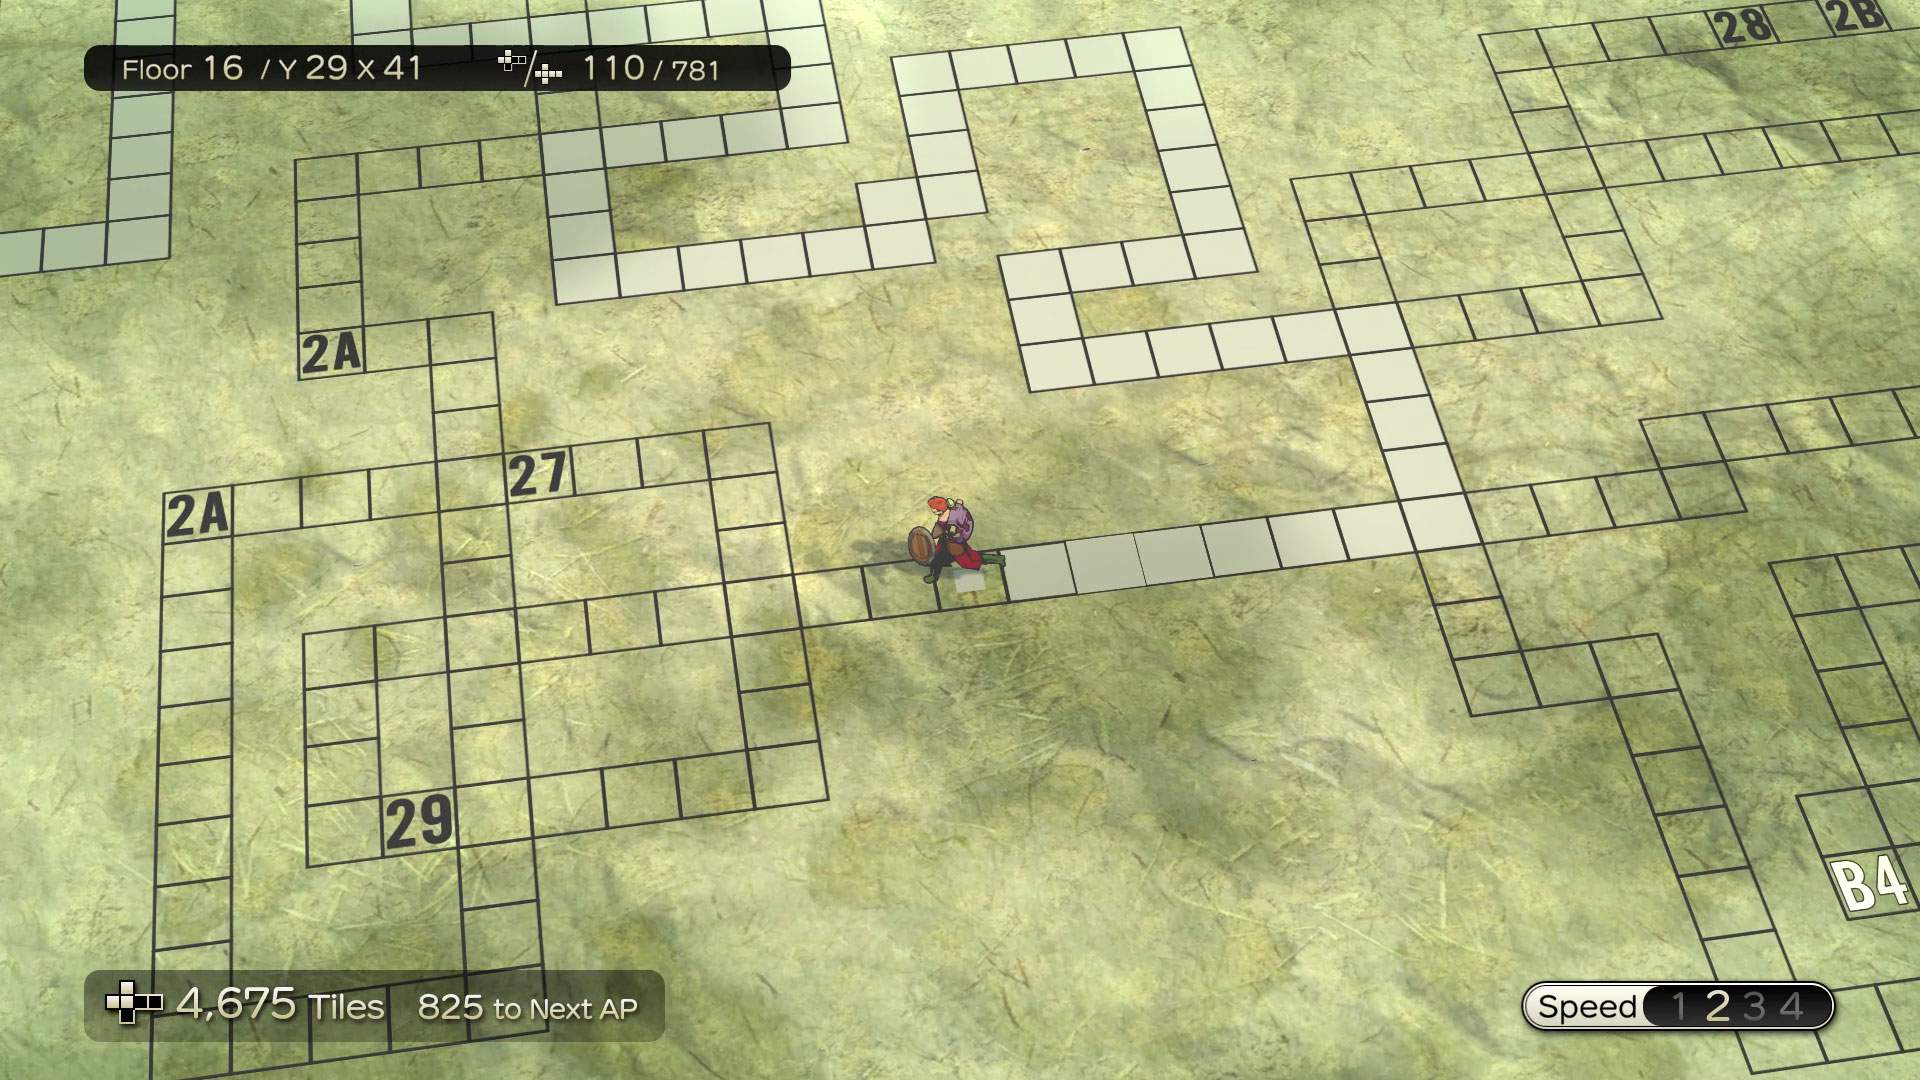 Gameplay screenshot showing a character stepping onto a tile, on a grid-based map on floor 16.